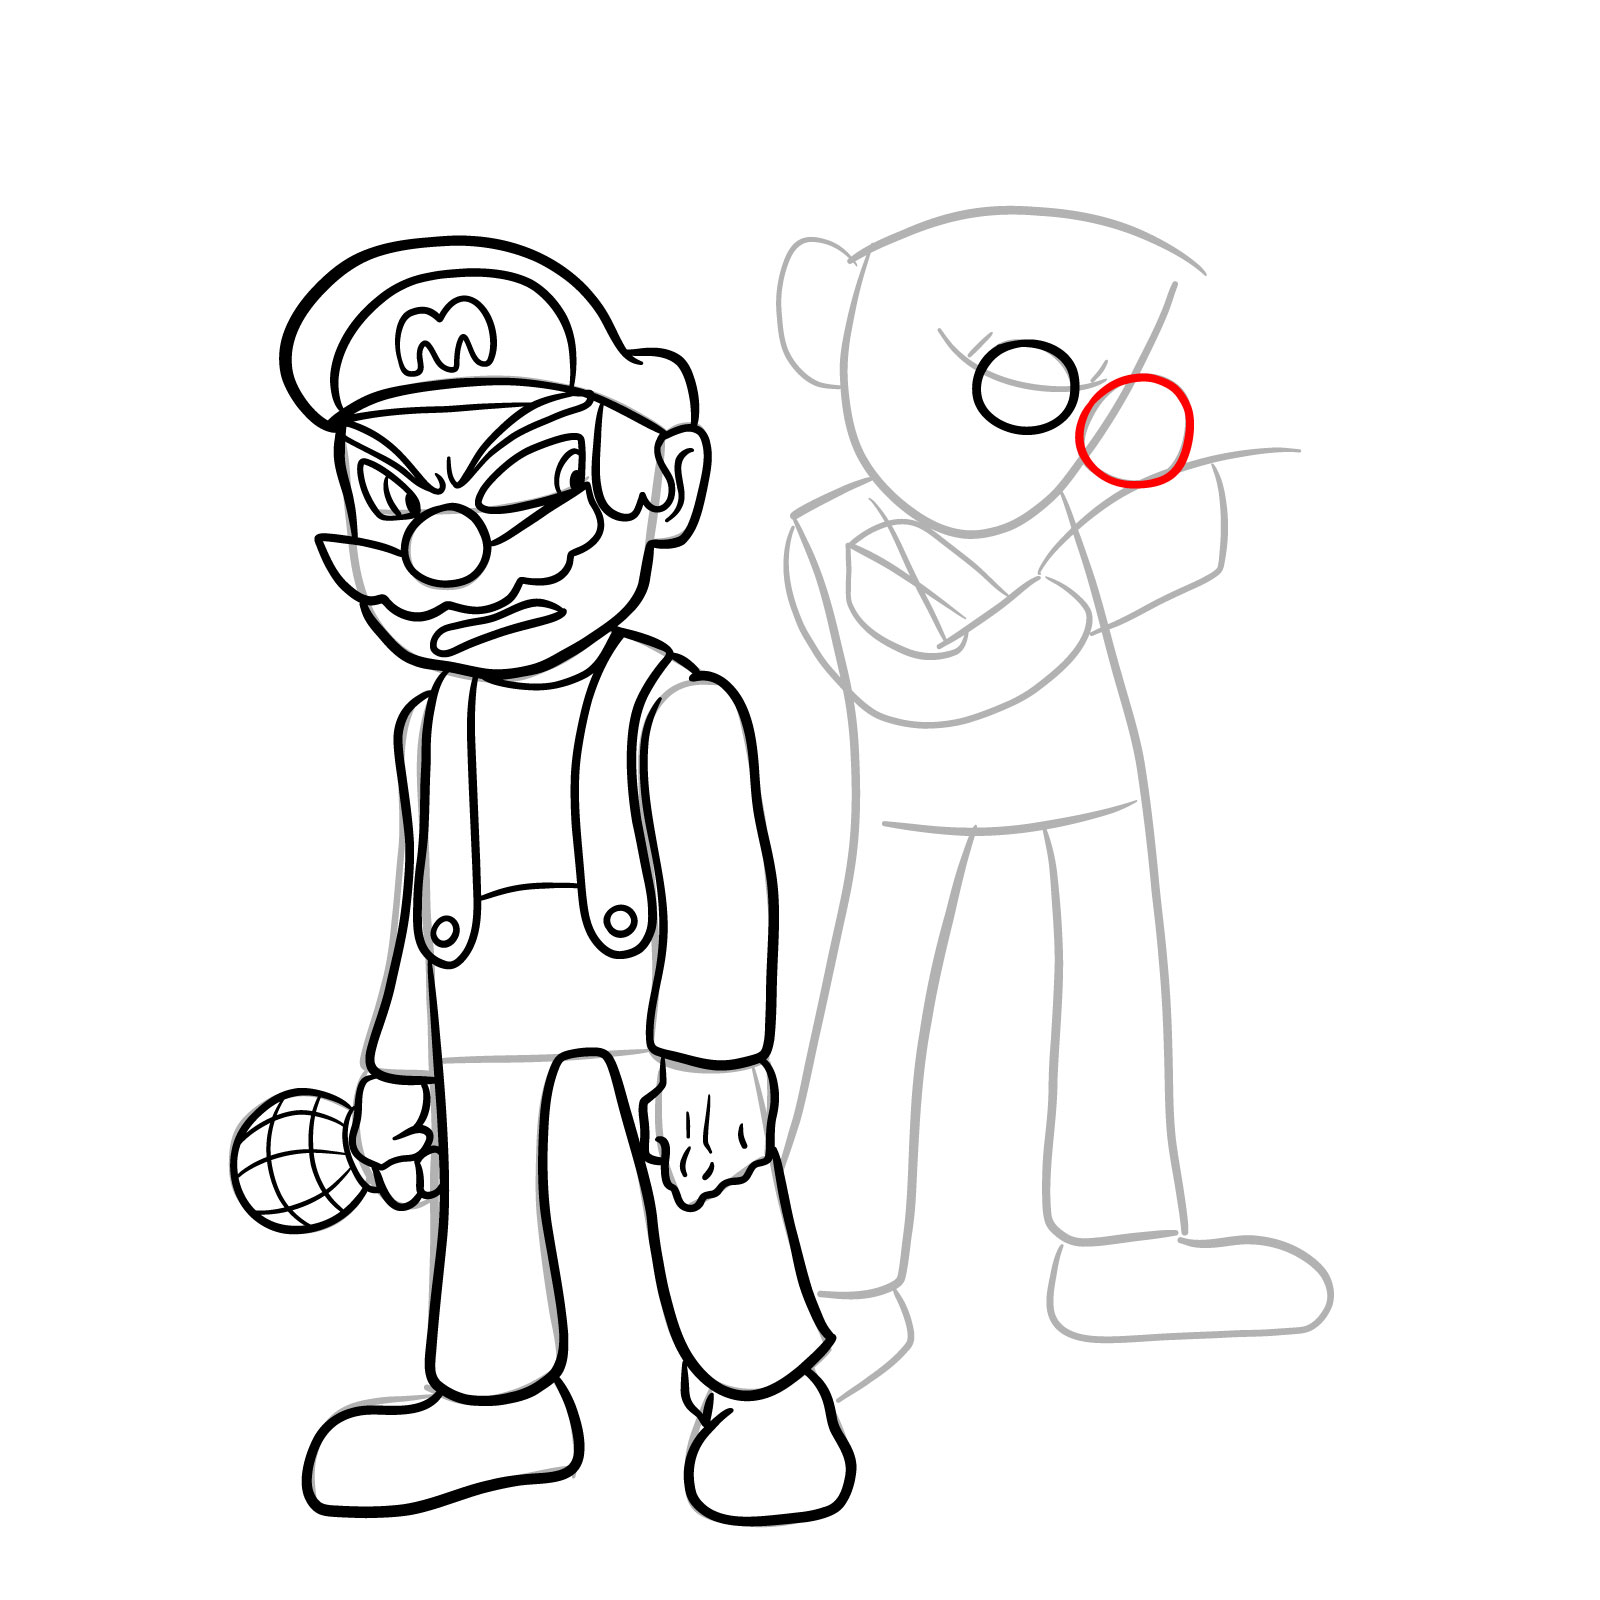 How to draw Mario and Luigi from Tails Gets Trolled - step 24